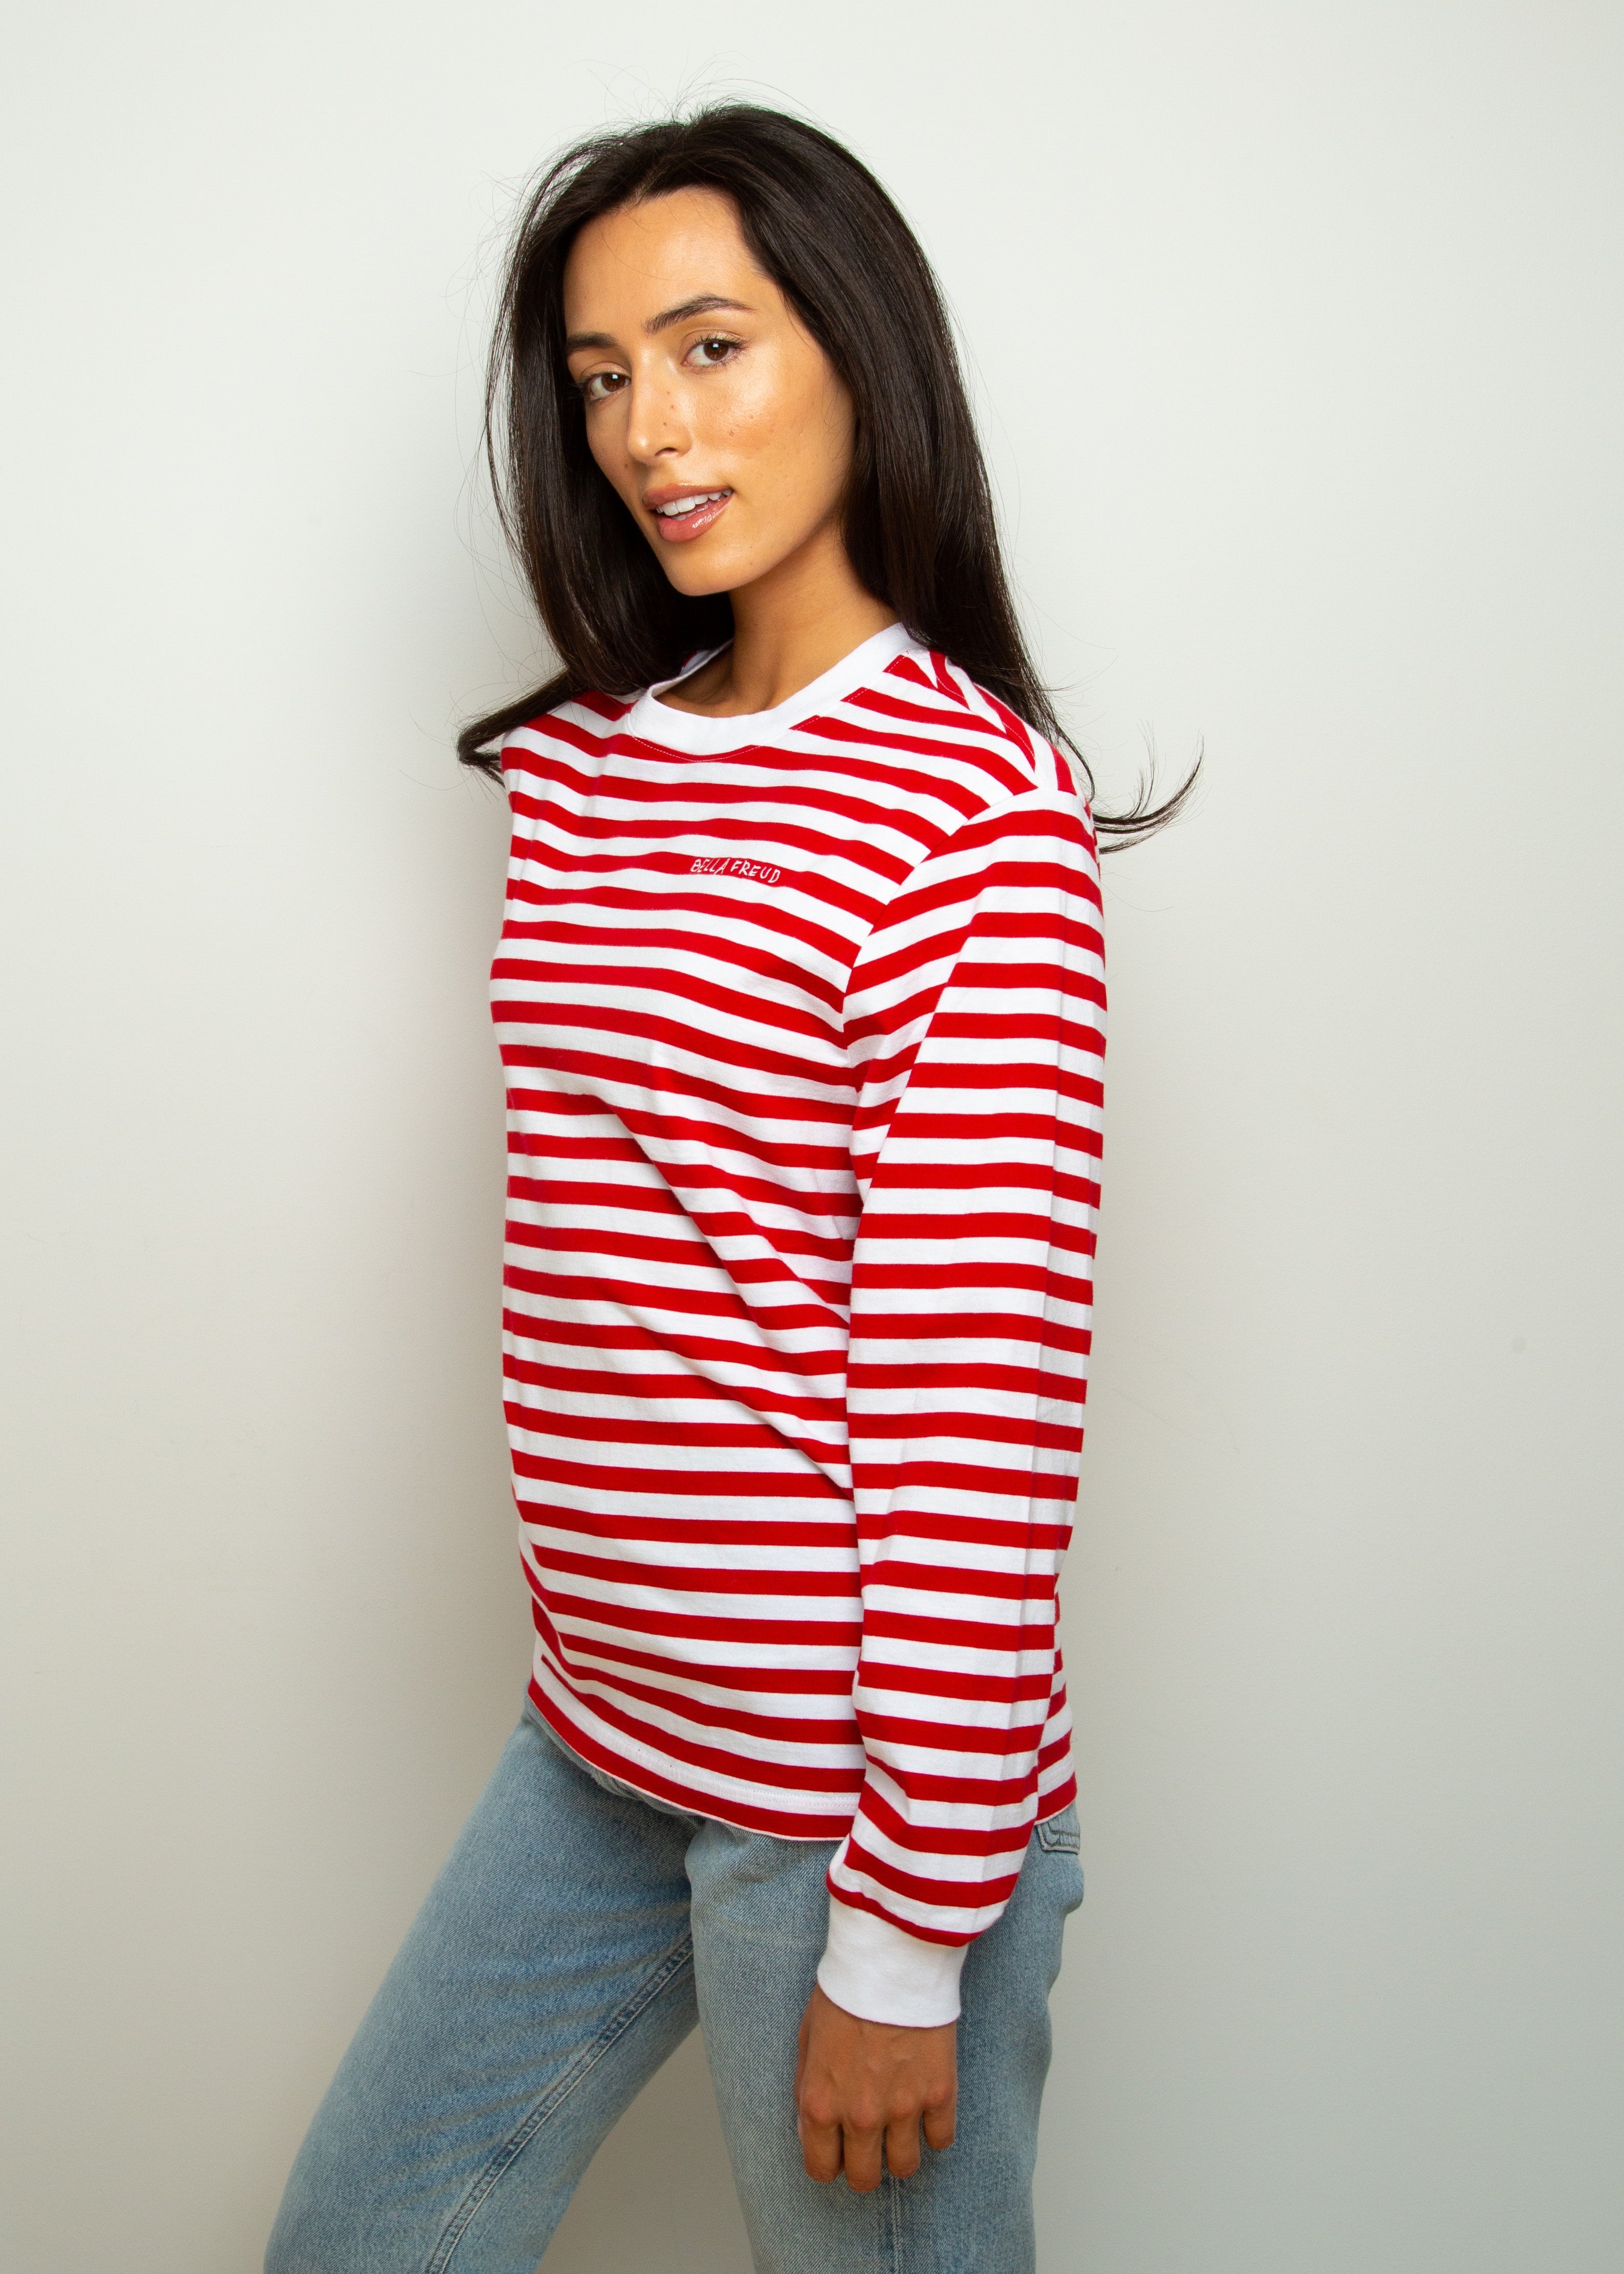 BF LS Striped Top in Red